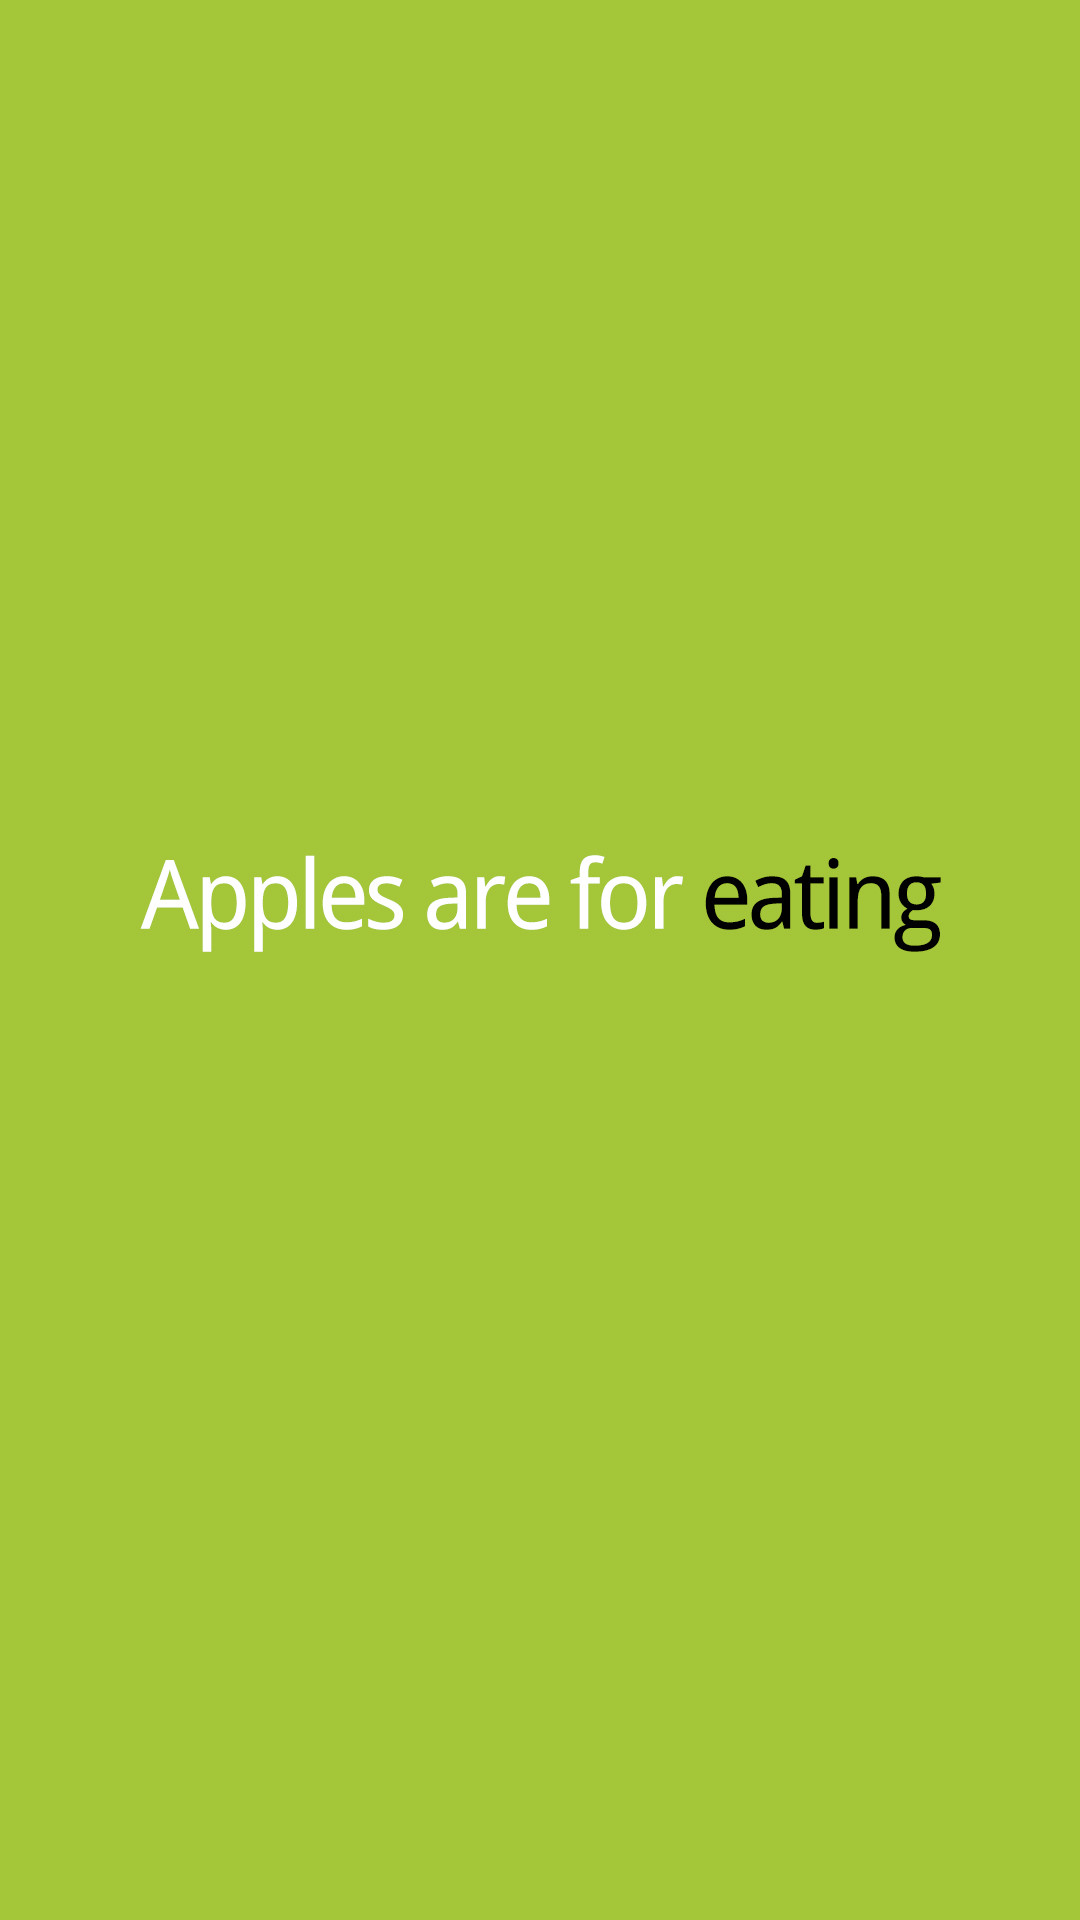 1080x1920 Apples are for eating htc one wallpaper